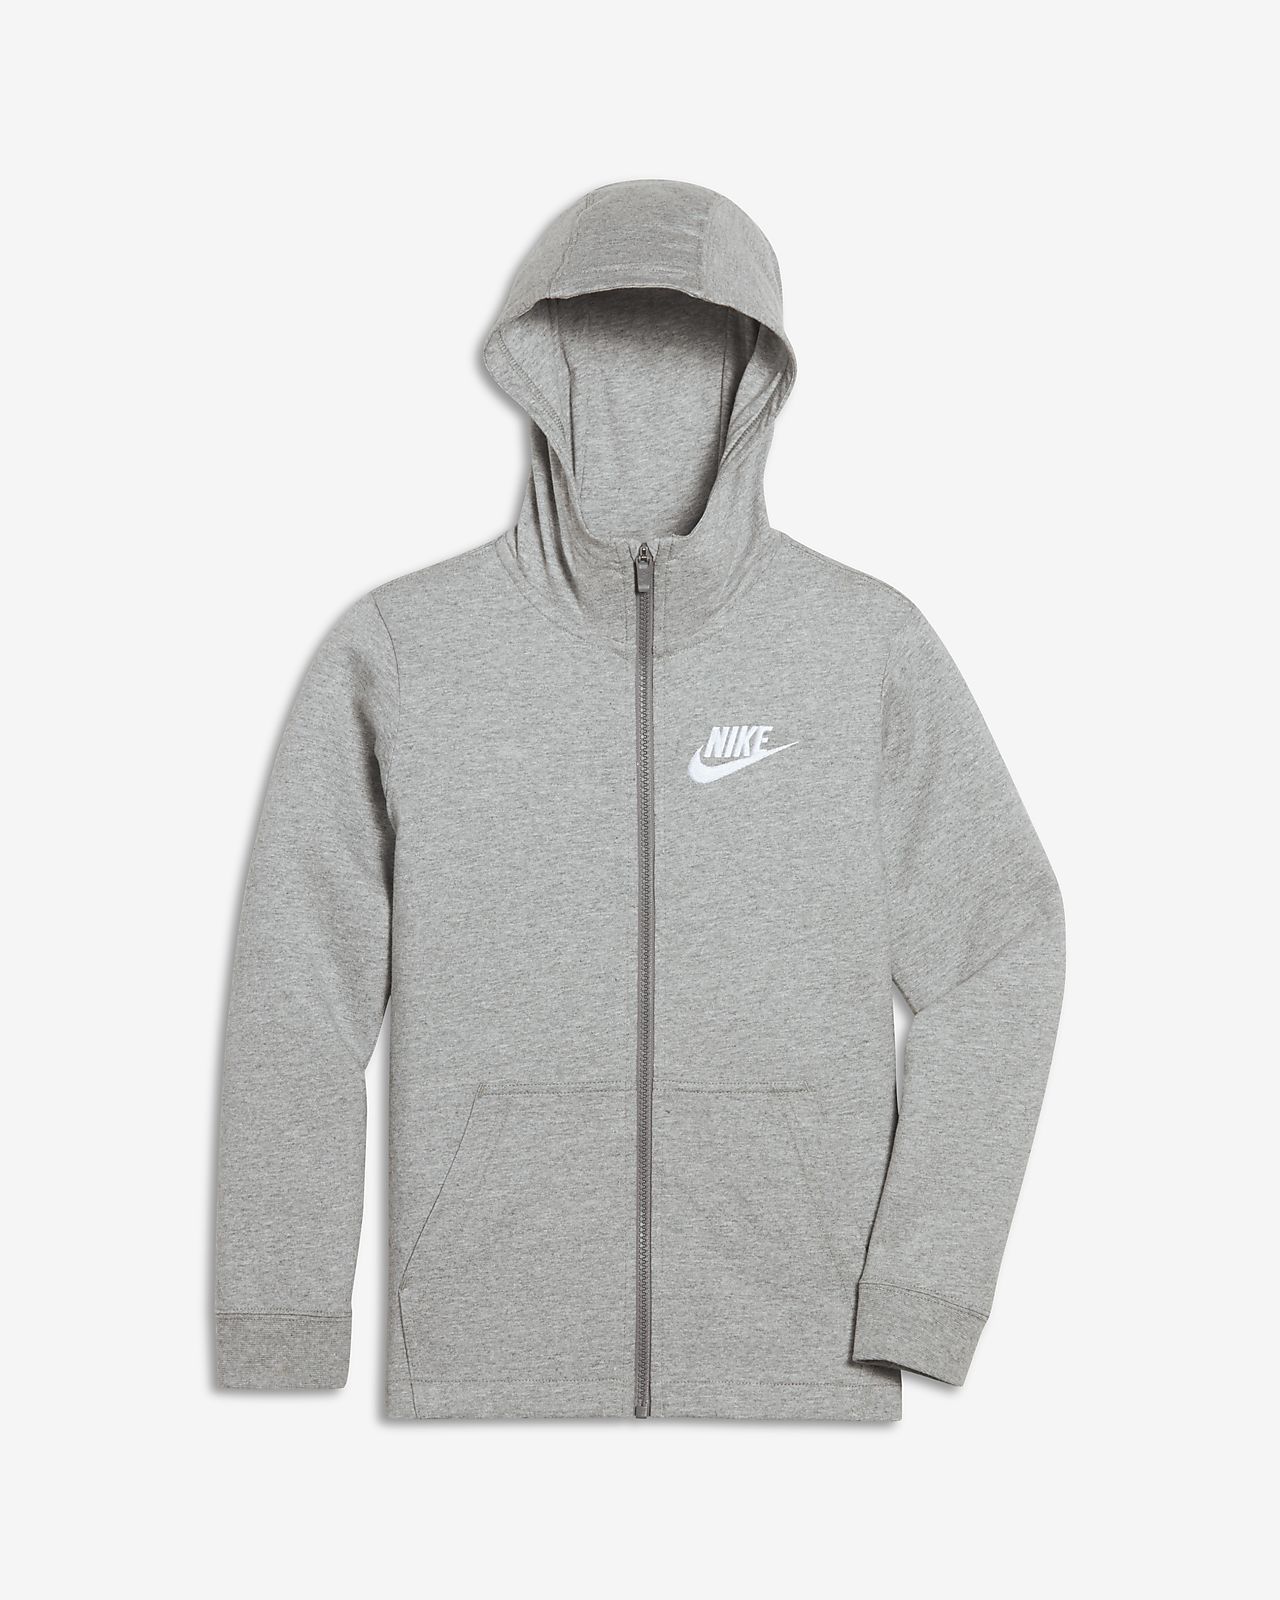 nike grey hoodie Online Shopping for 